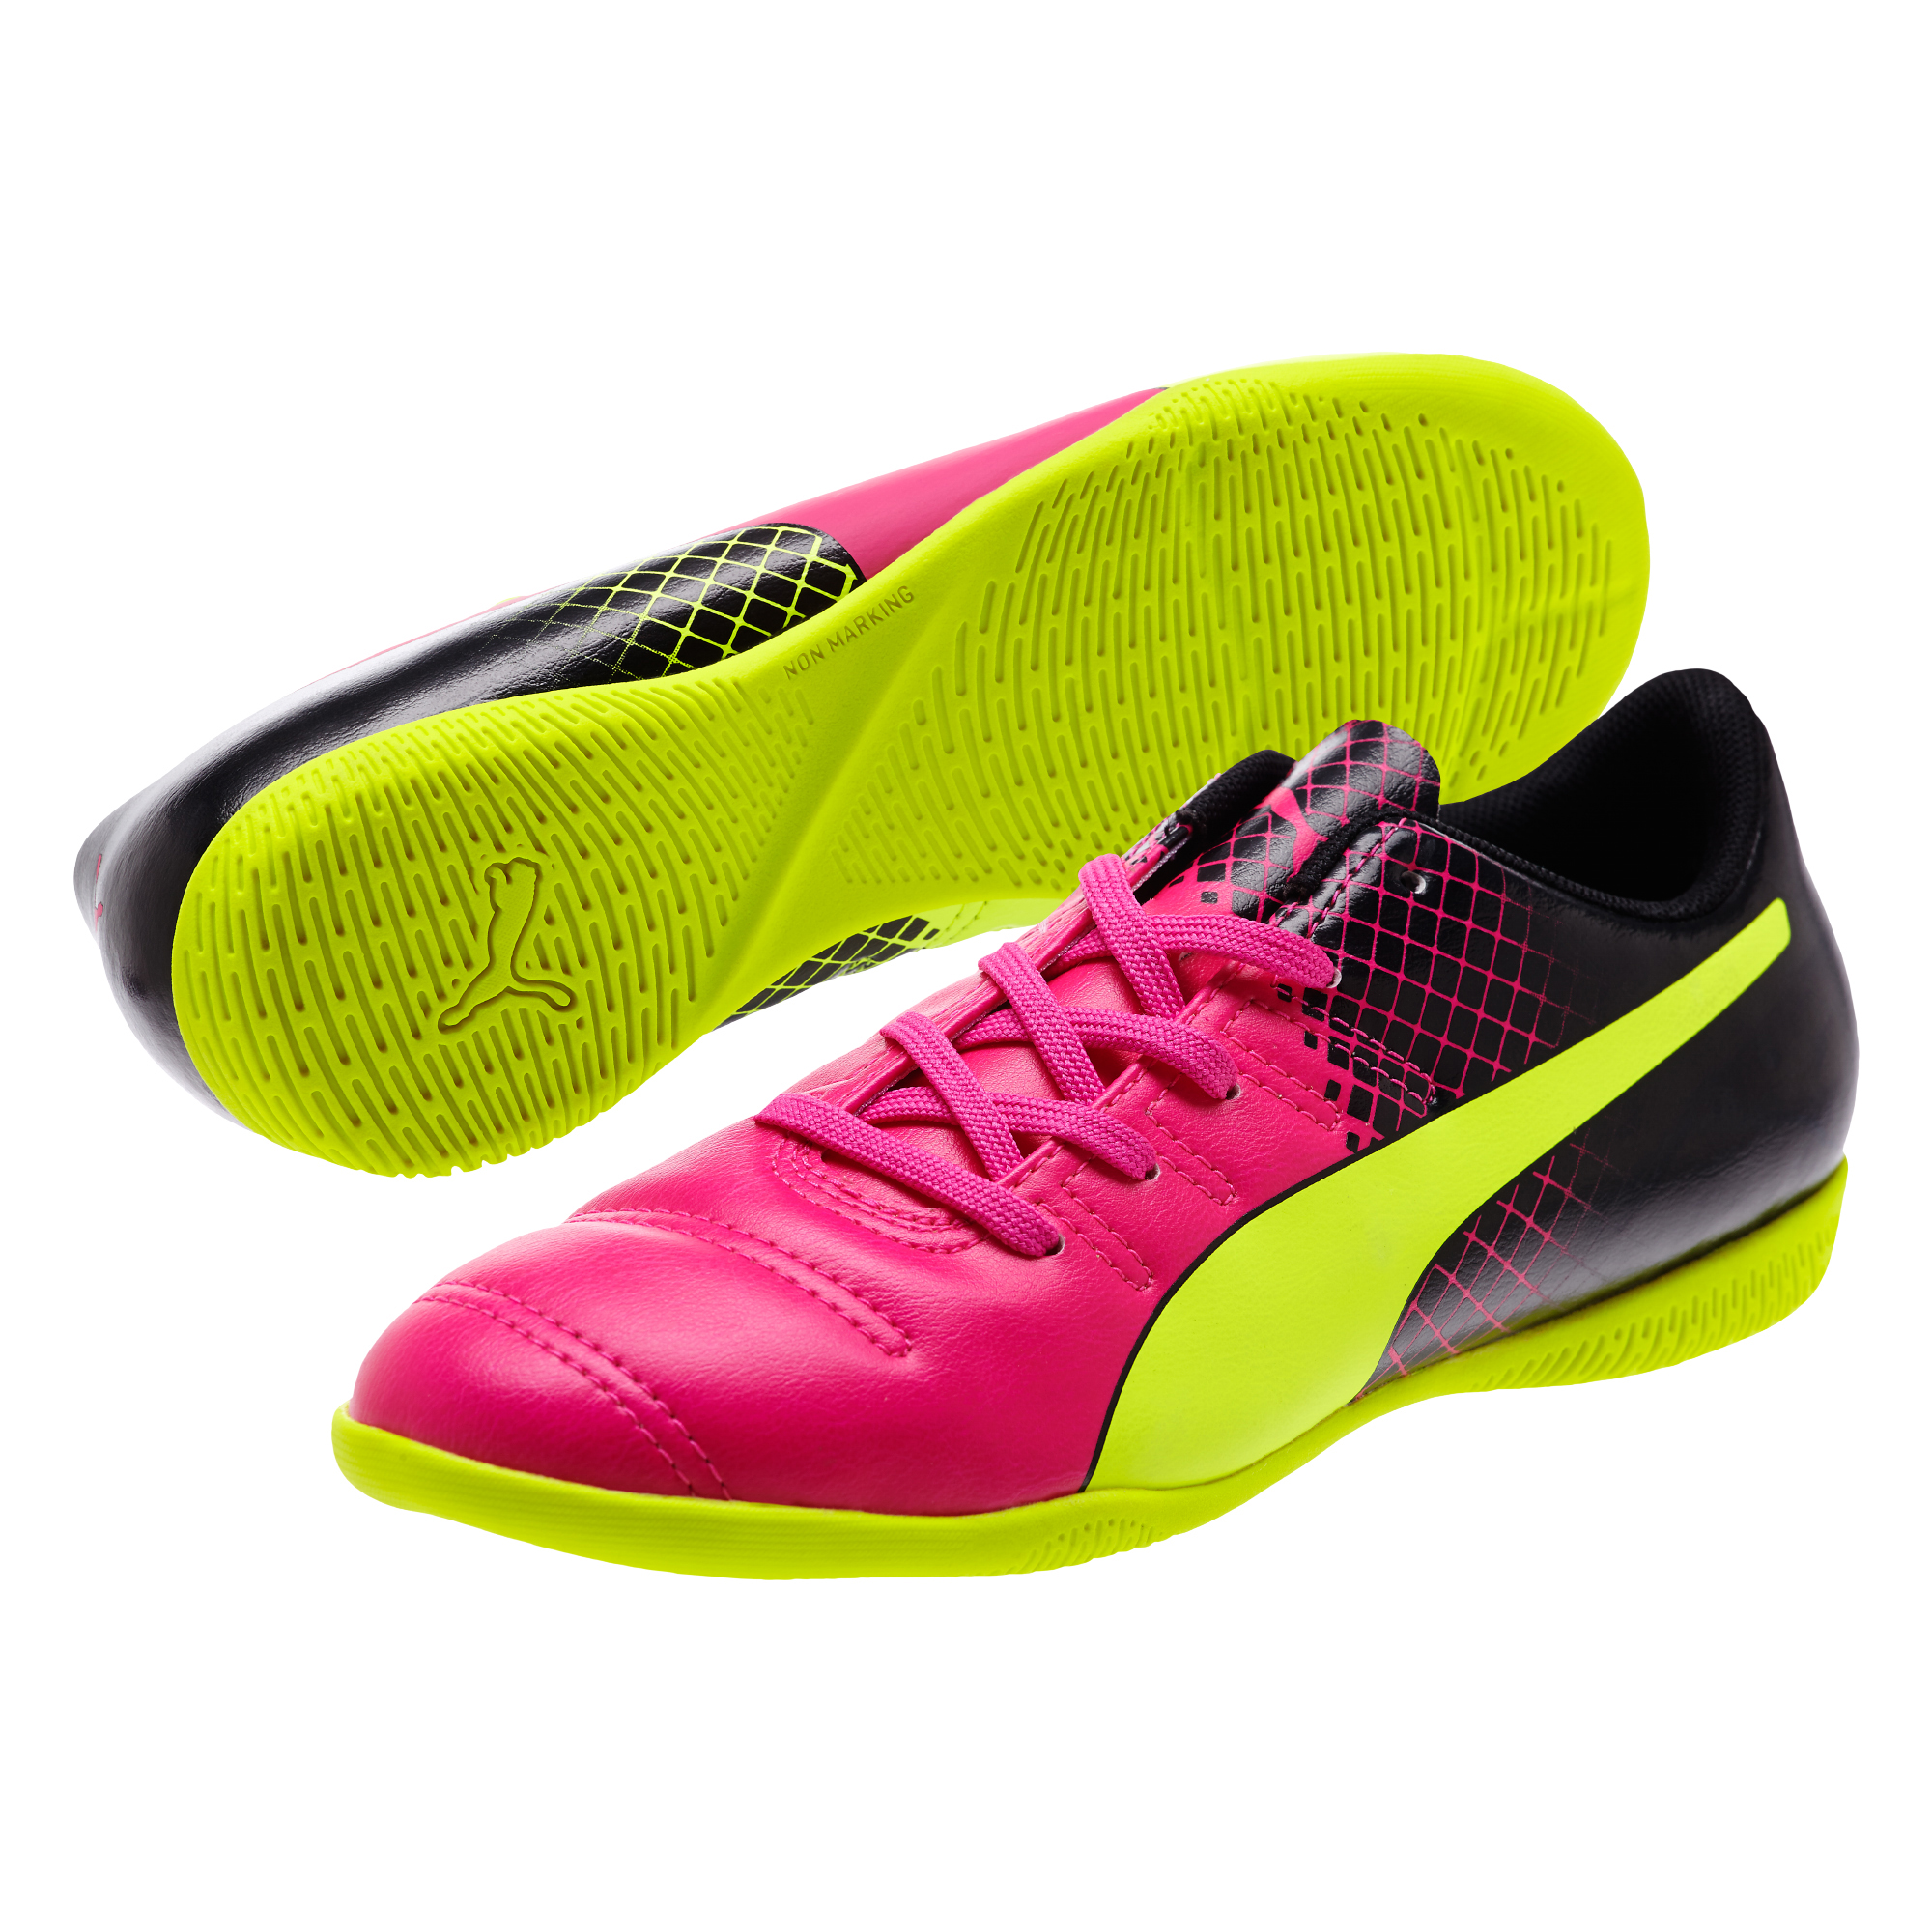 puma indoor soccer shoes youth